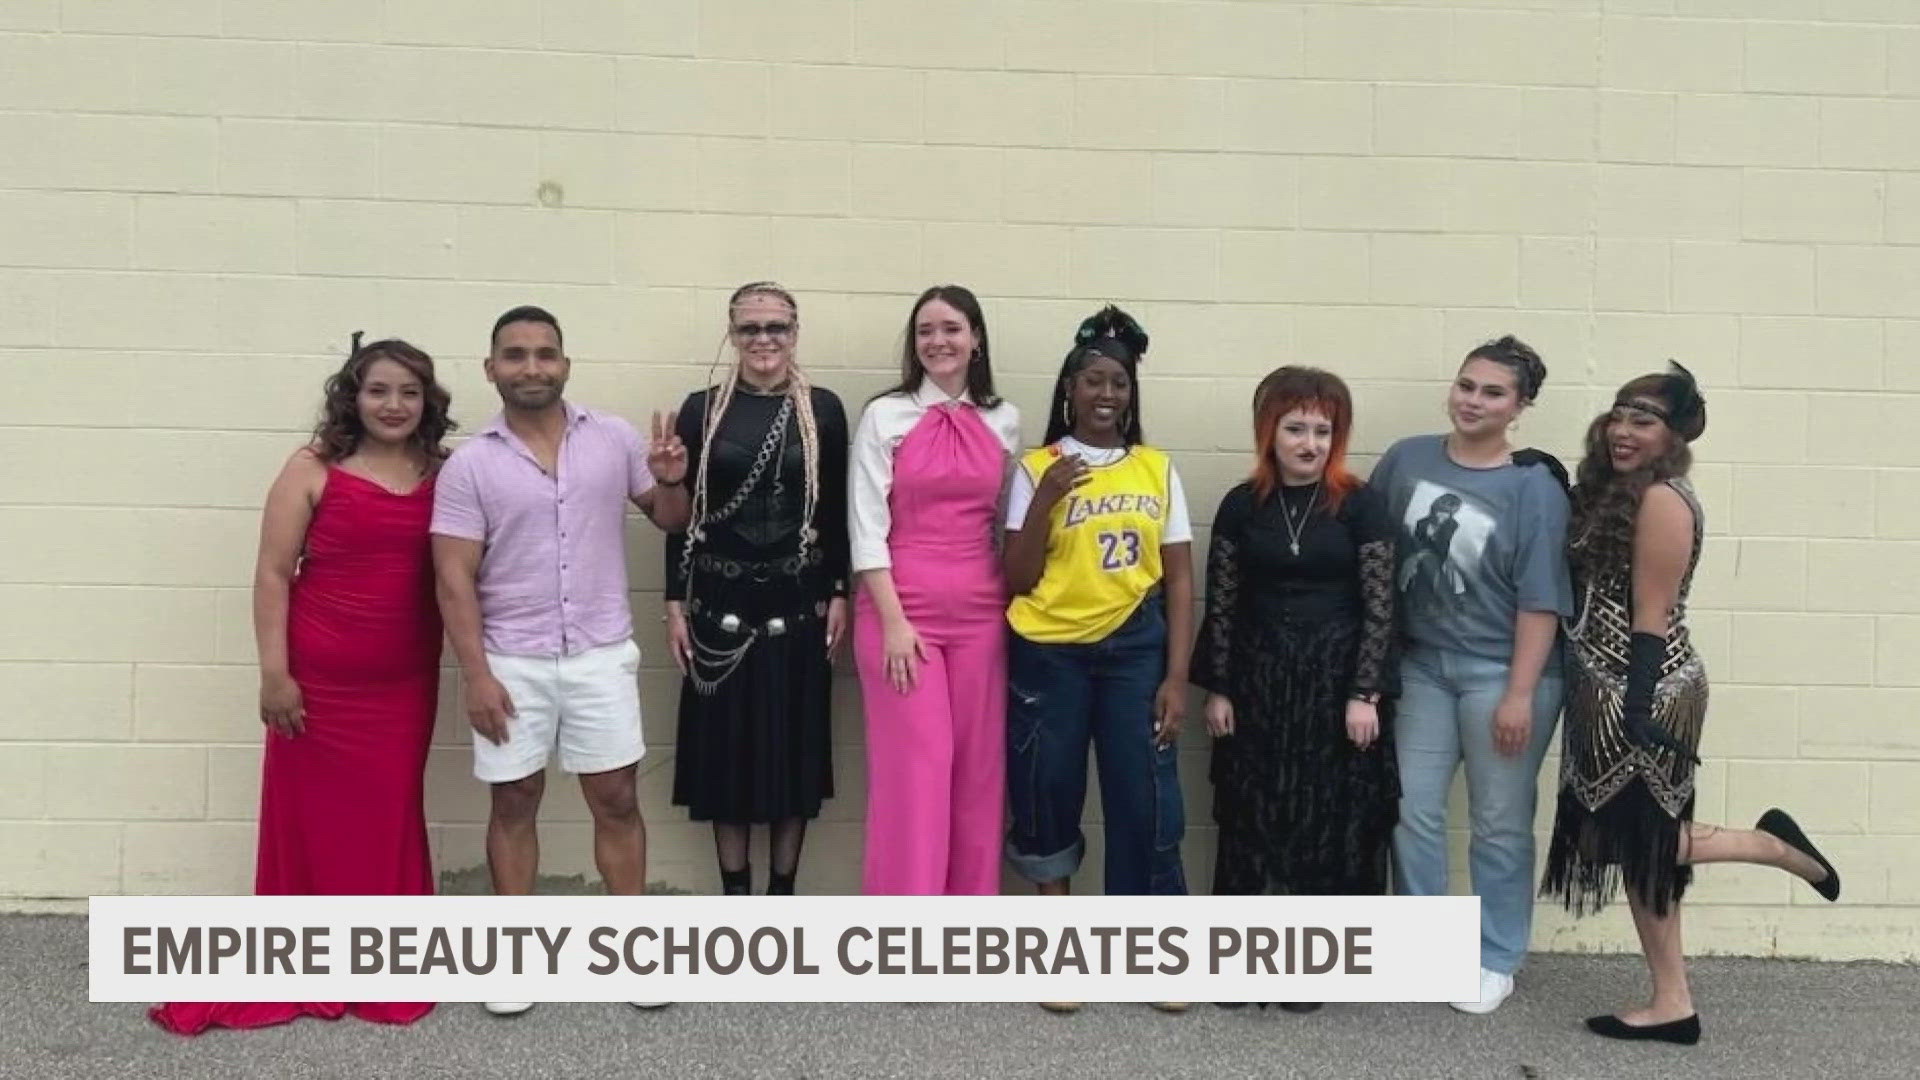 In celebration of Pride Month, Empire Beauty School in Grand Rapids held its Decades of Pride Fashion Show with models showcasing the trendy looks of each decade.